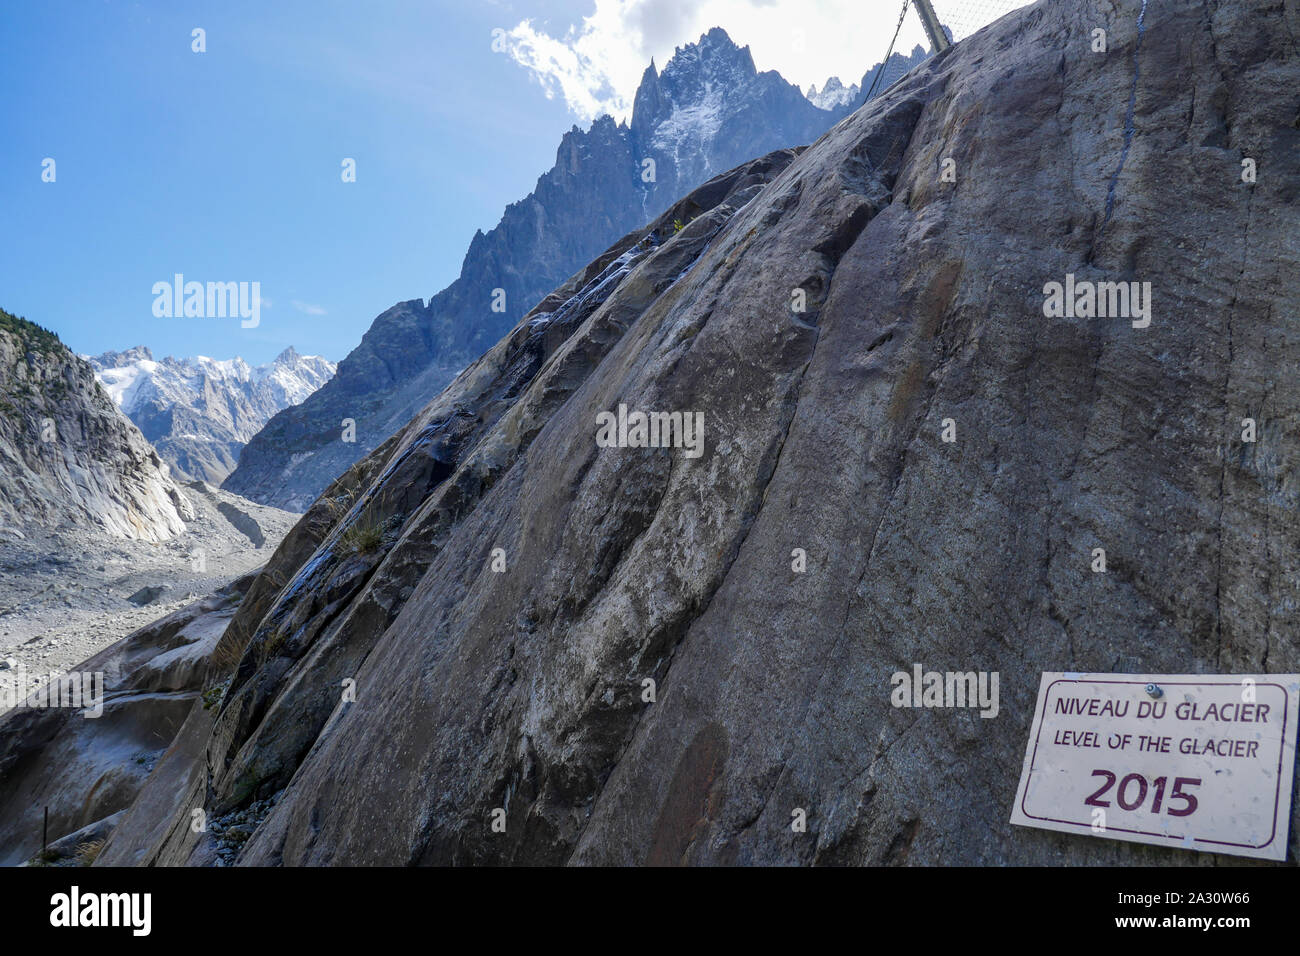 Ice Sea - in French, Mer de Glace, Chamonix-Mont-Blanc valley, Haute-Savoie, France Stock Photo